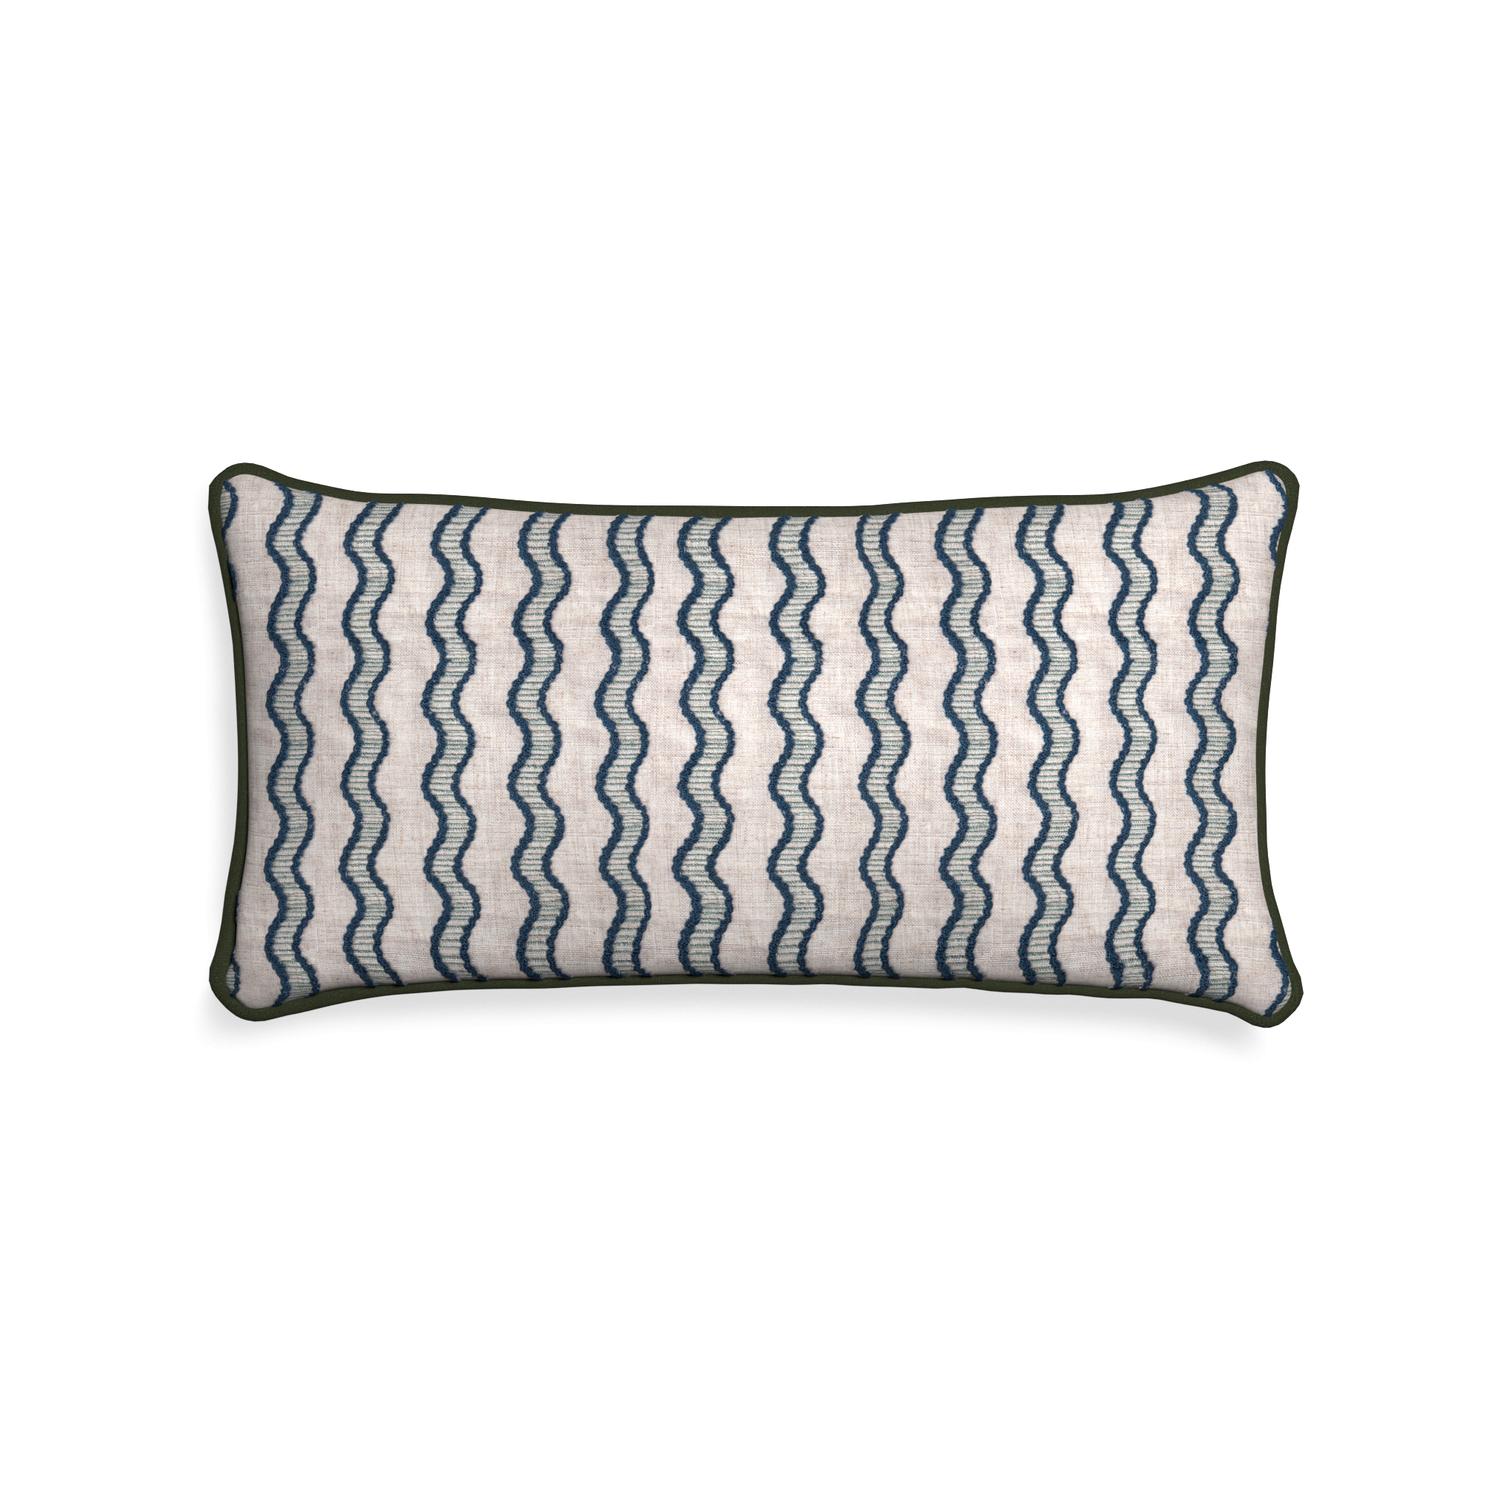 Midi-lumbar beatrice custom embroidered wavepillow with f piping on white background